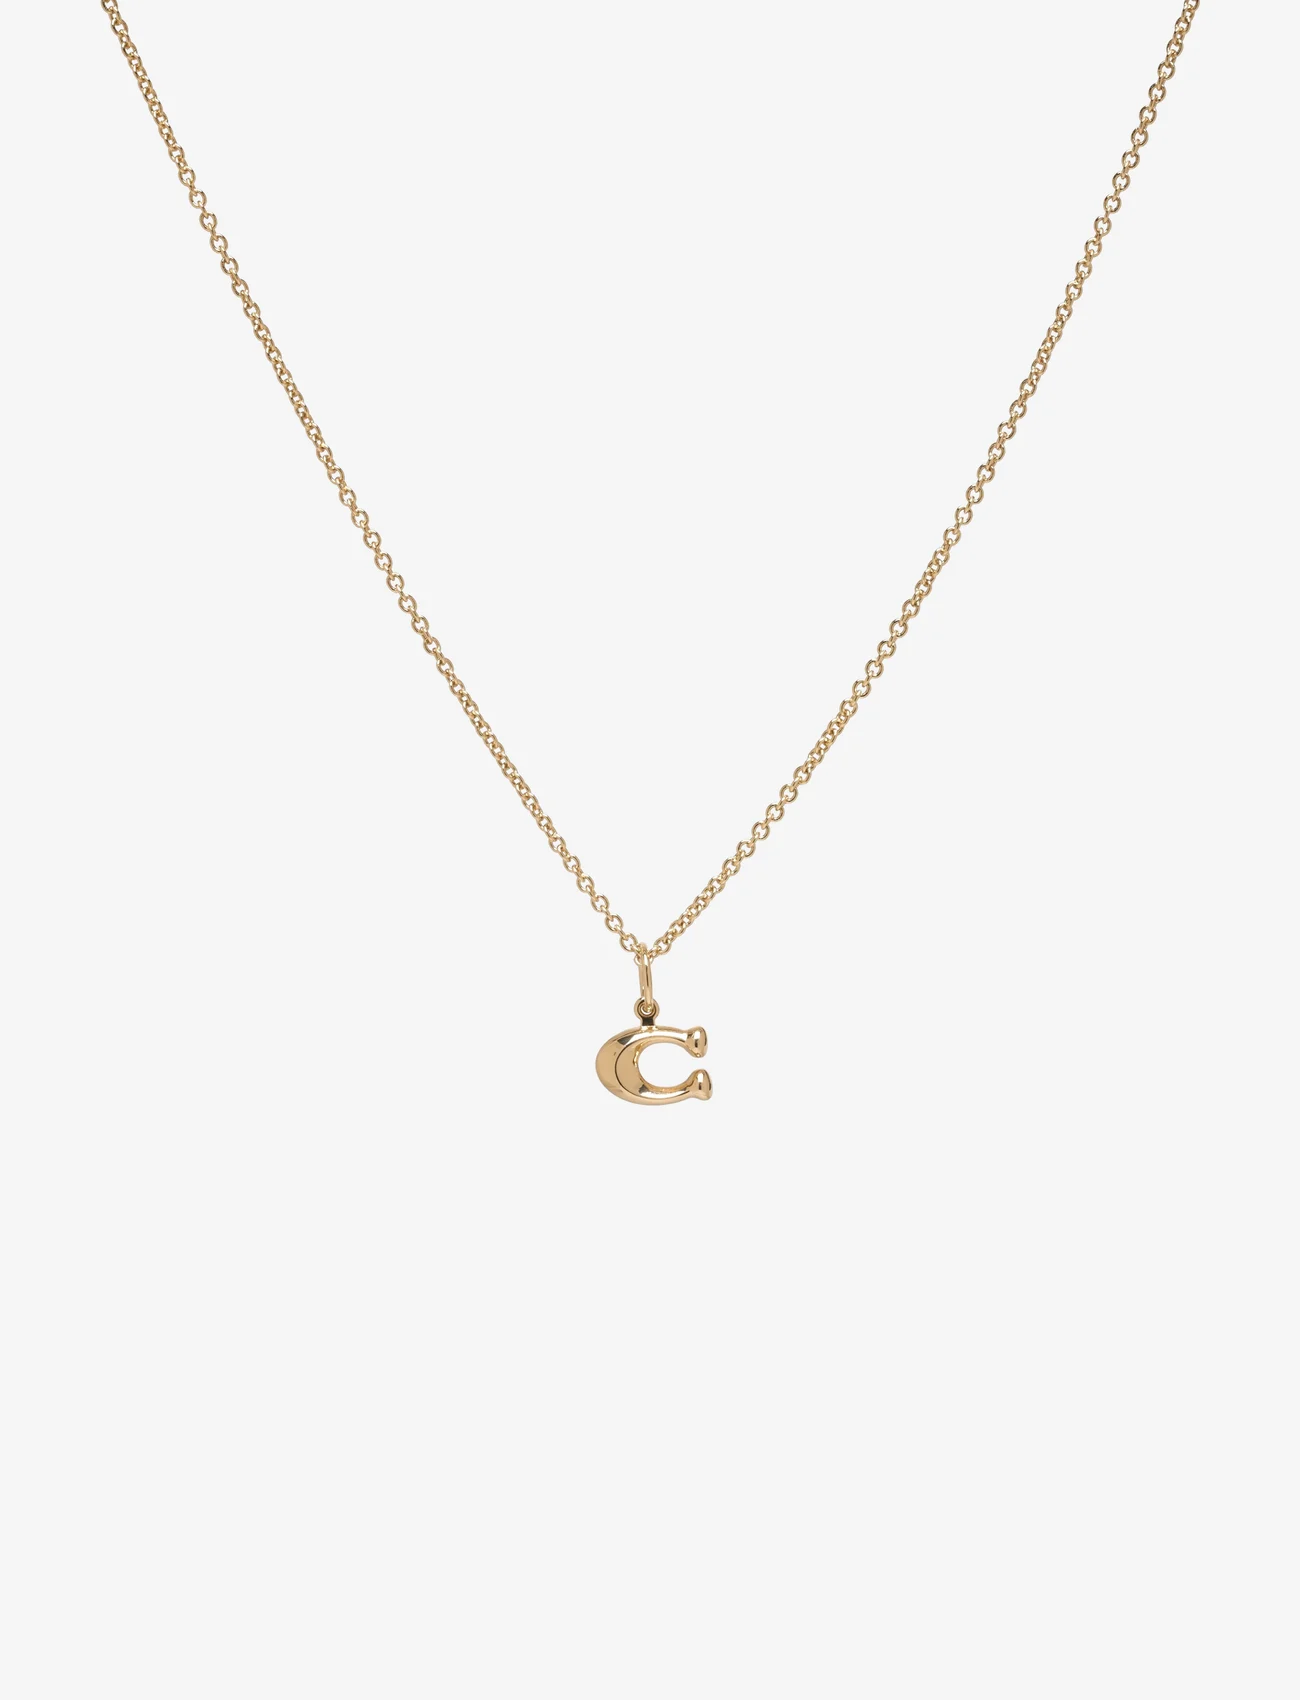 Coach Accessories - COACH Signature Starter Necklace - dainty necklaces  use default - shiny gold - 0